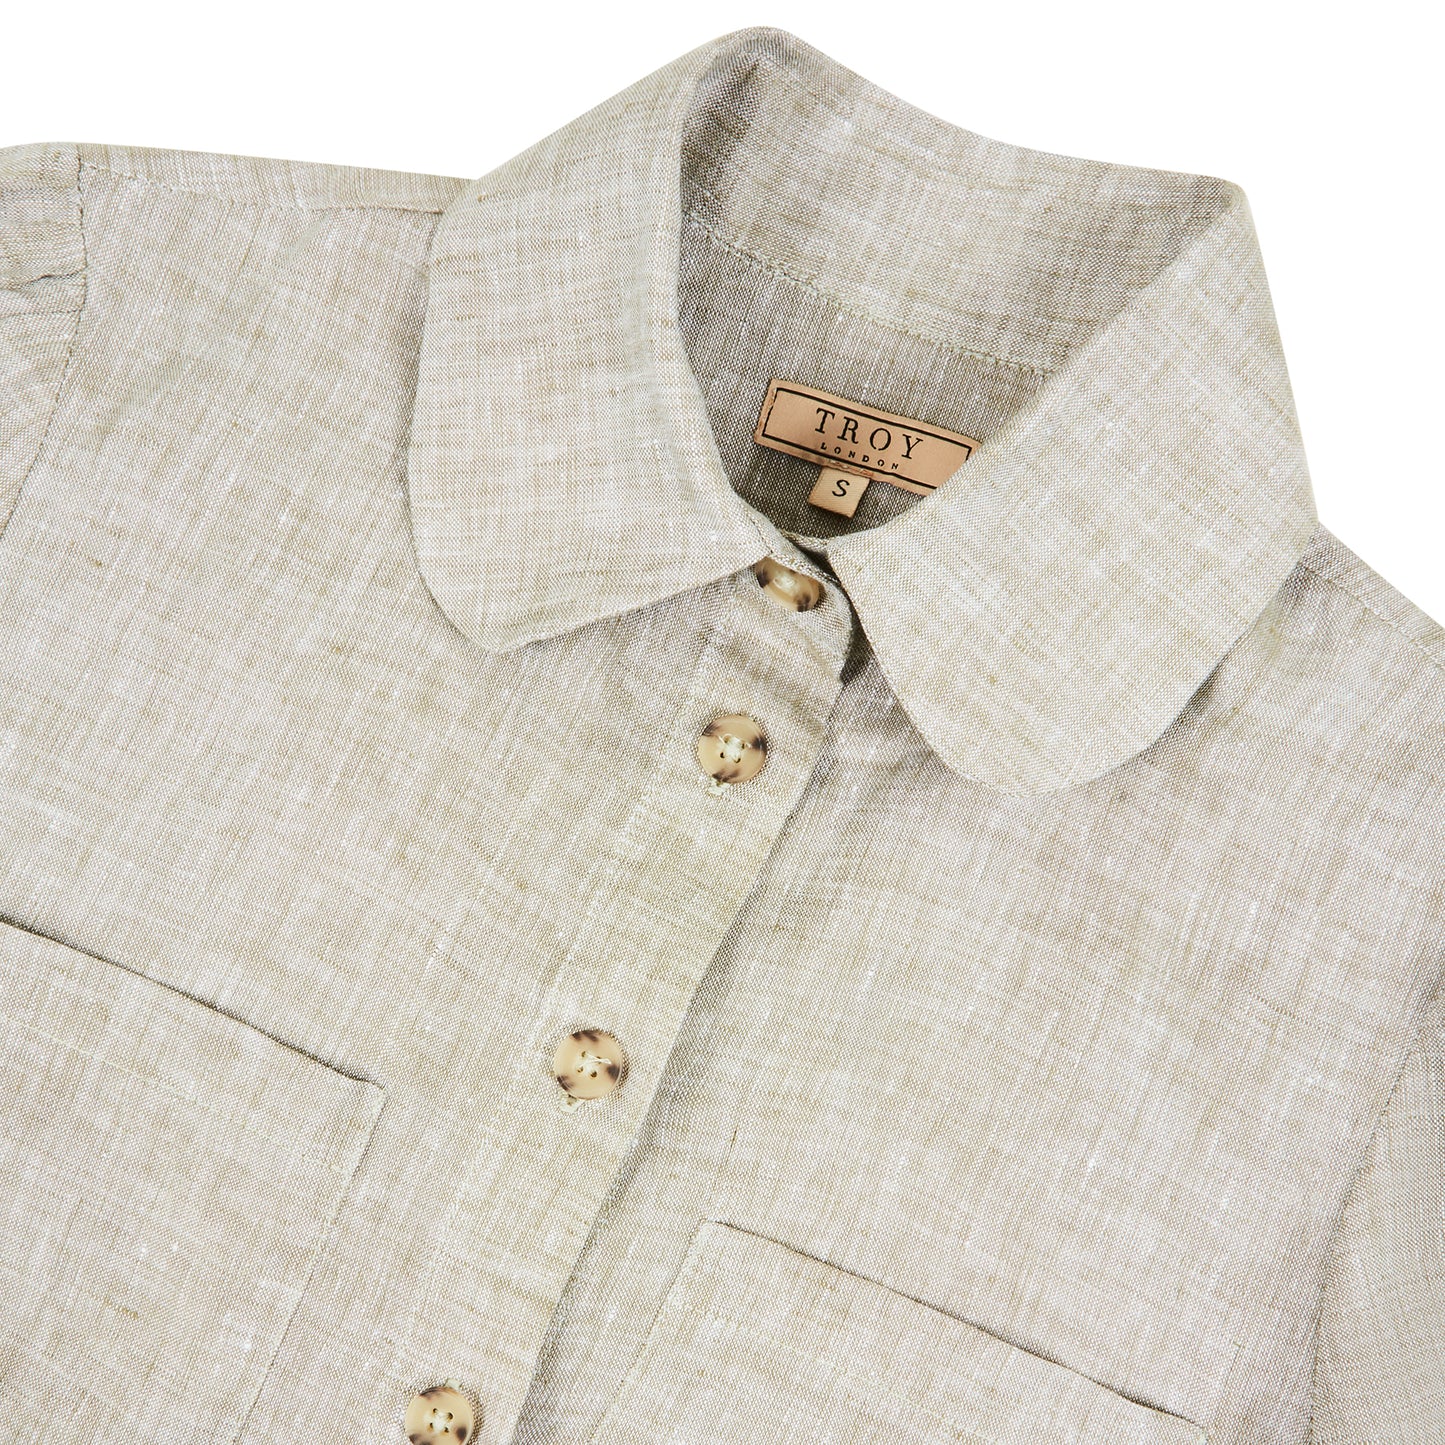 Ladies Luxury Linen Shirt, Linen Blouse, Made in Britain, British Country Clothing